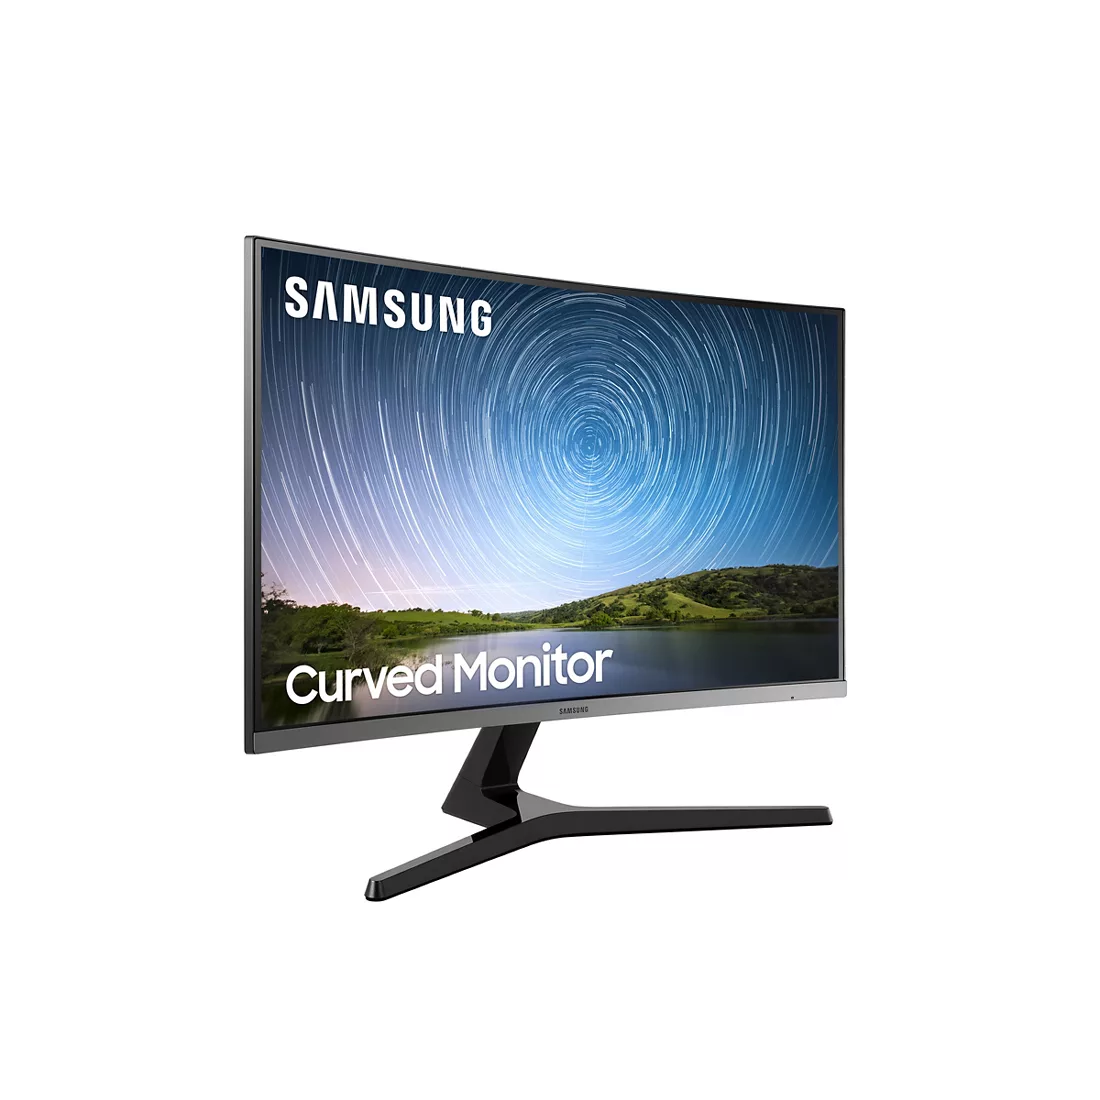 Samsung CR50 32in 1080p Curved Monitor